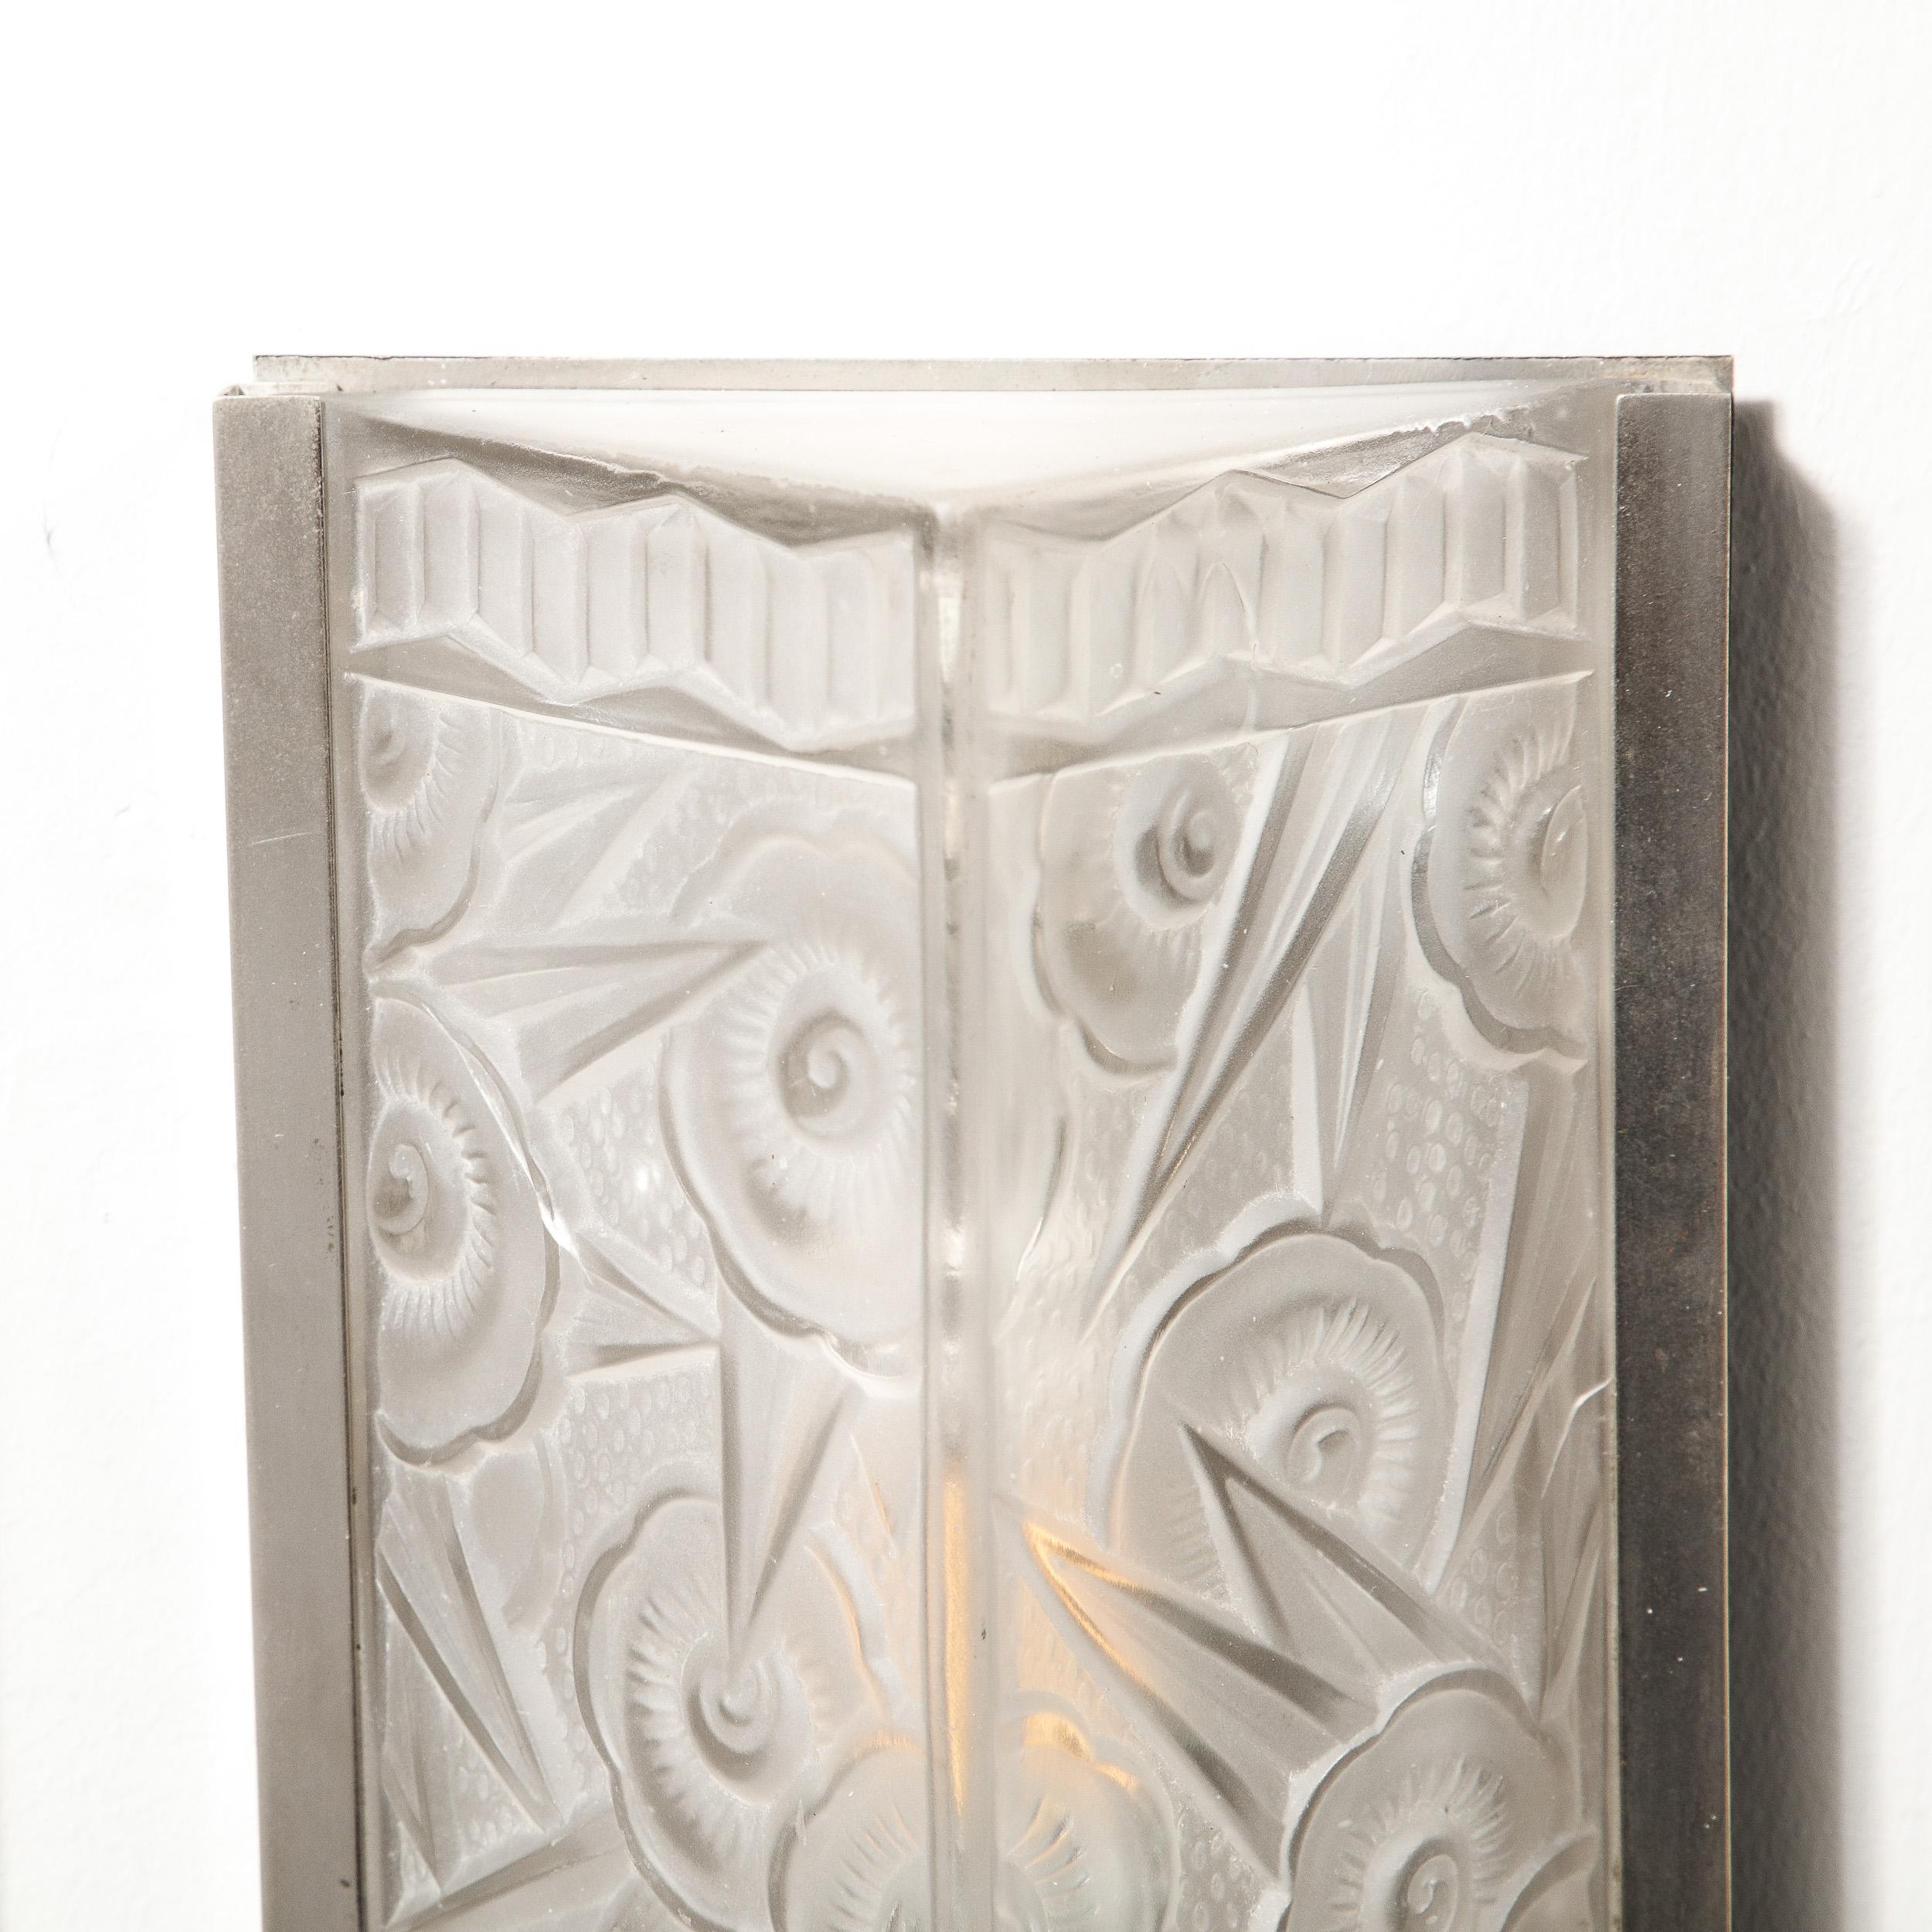 Pair of Art Deco Molded & Frosted Glass Sconces w/ Stylized Cubist Floral Motifs 12